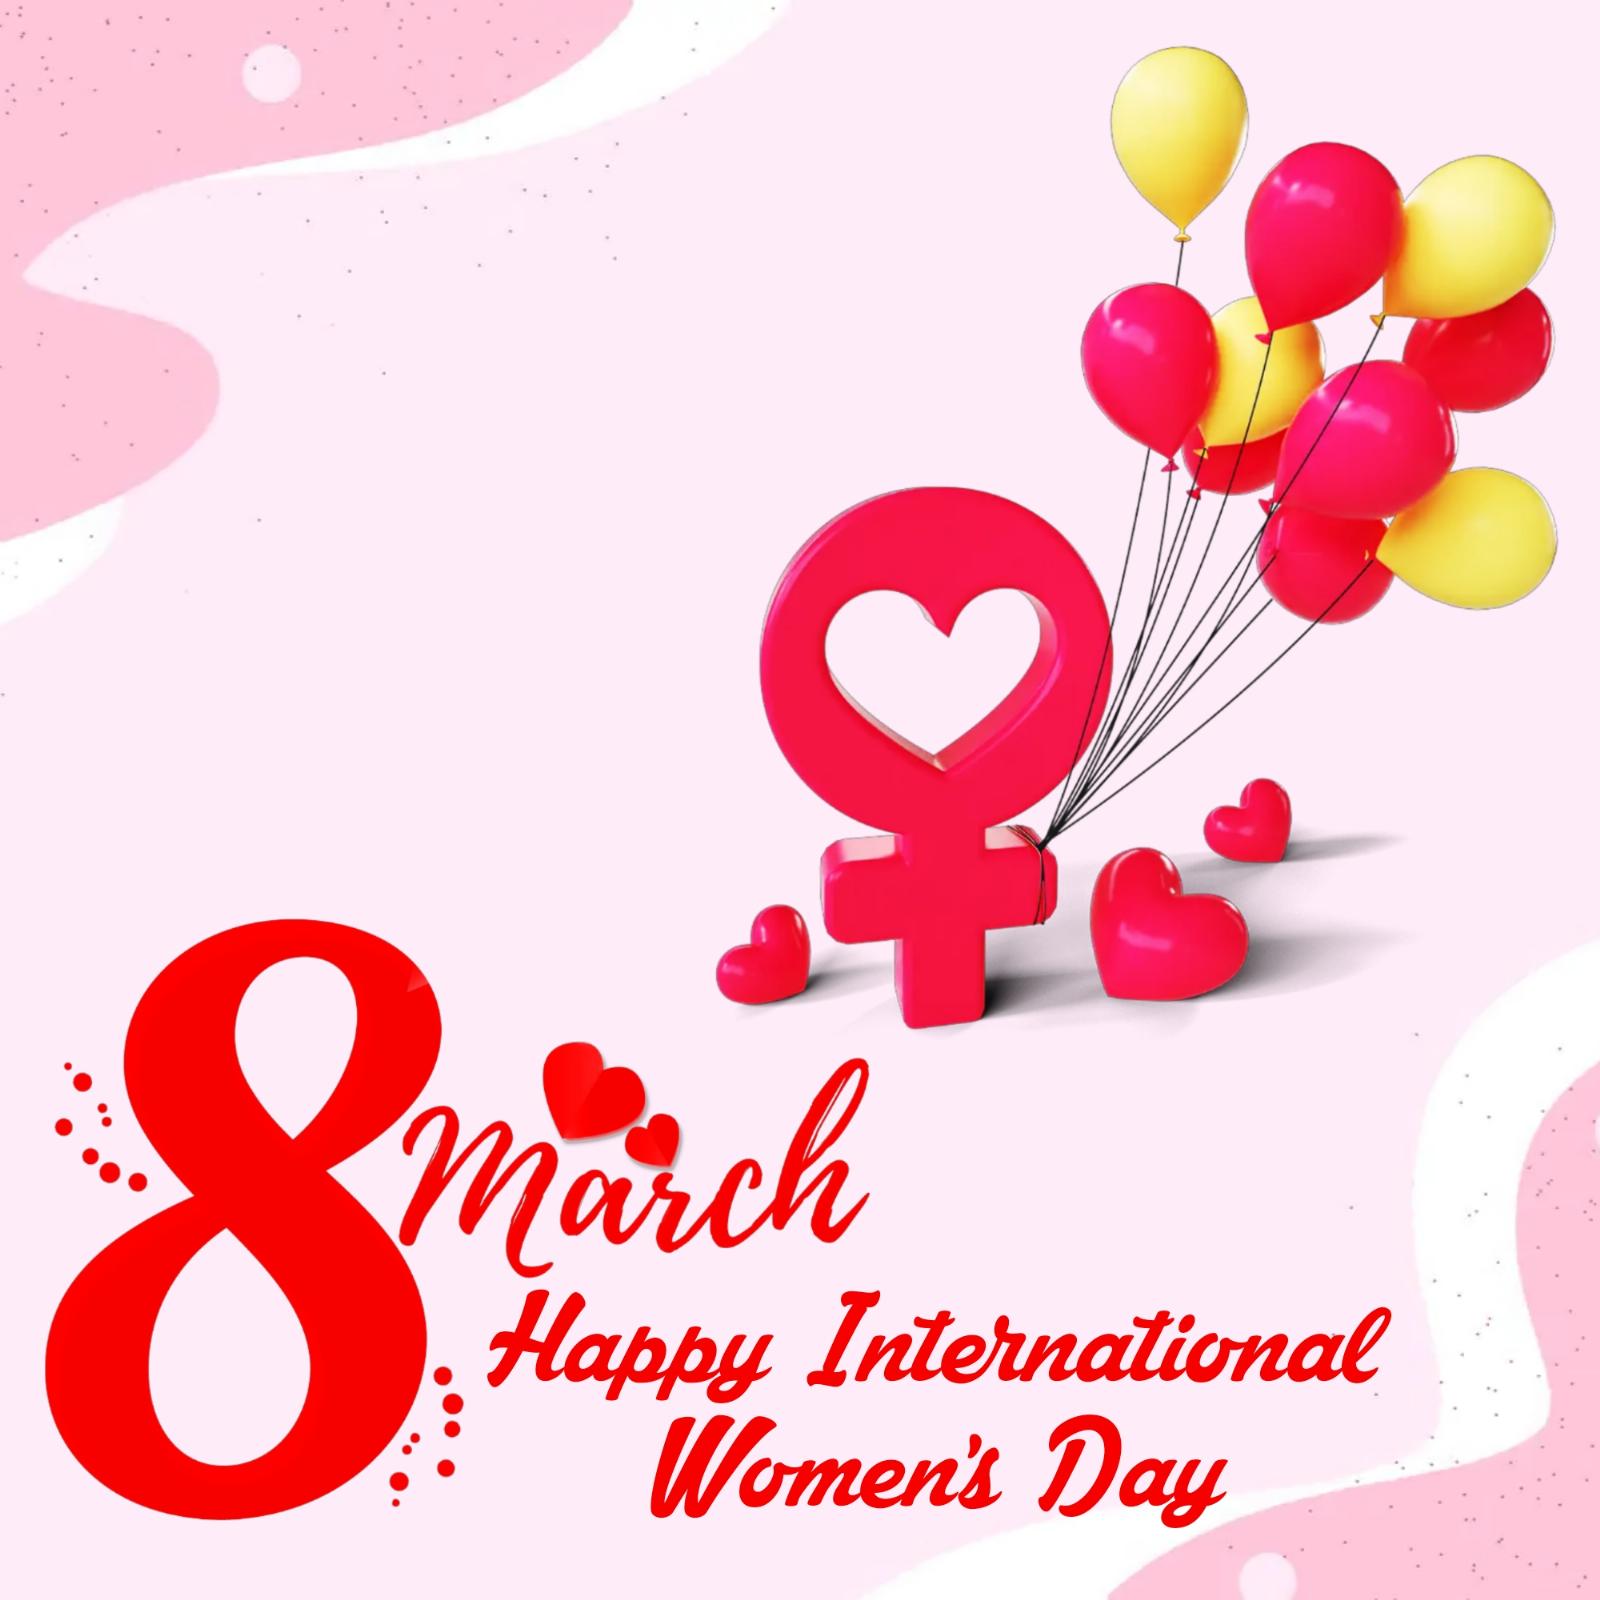 8 March Happy International Women's Day Images